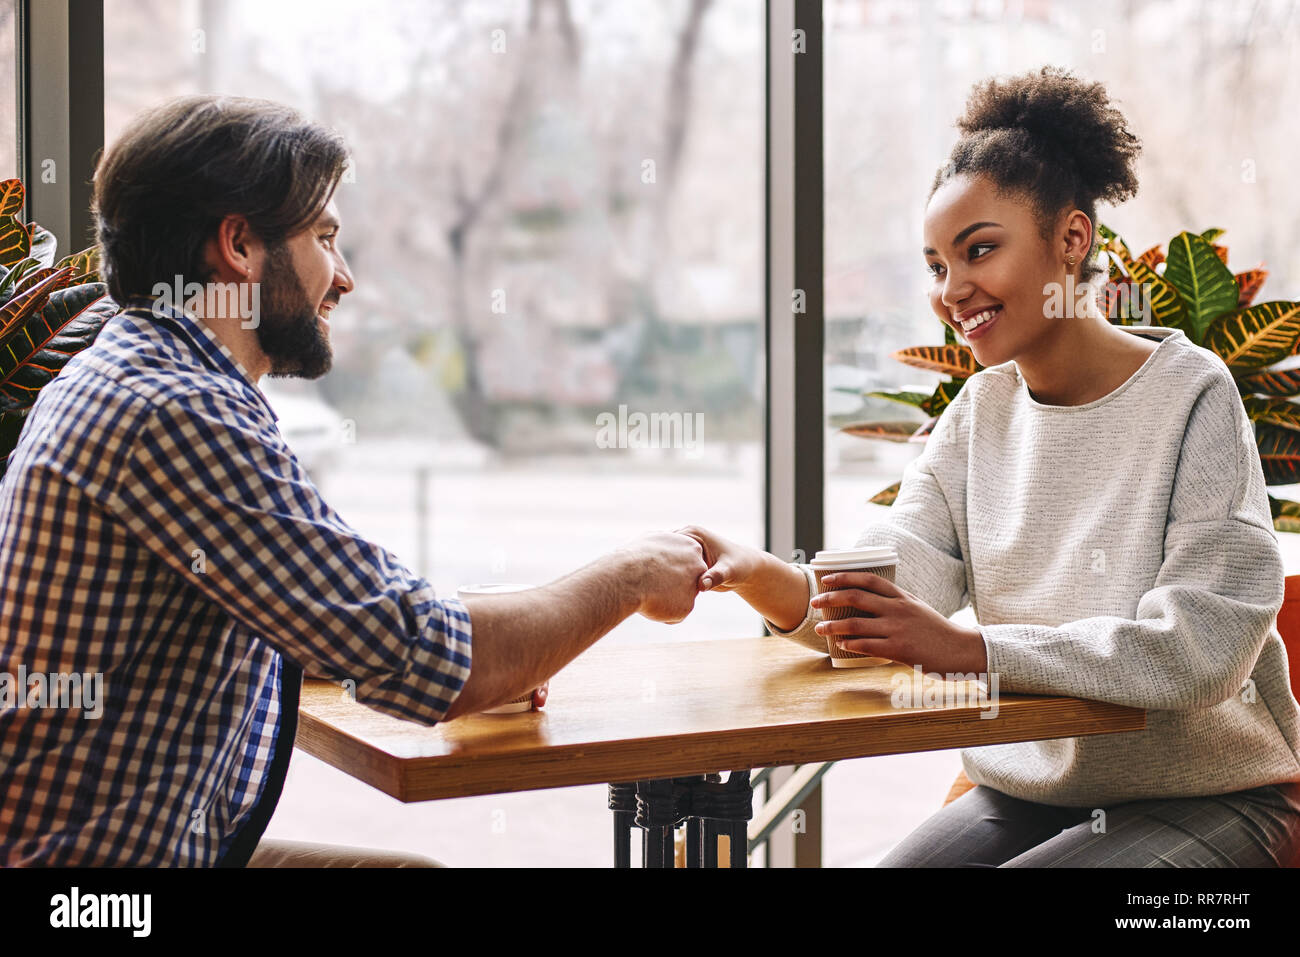 Side view portrait of two successful business people, man and woman, smiling and shaking hands across table during meeting in cafe. African american woman and caucasian dark-haired man Stock Photo